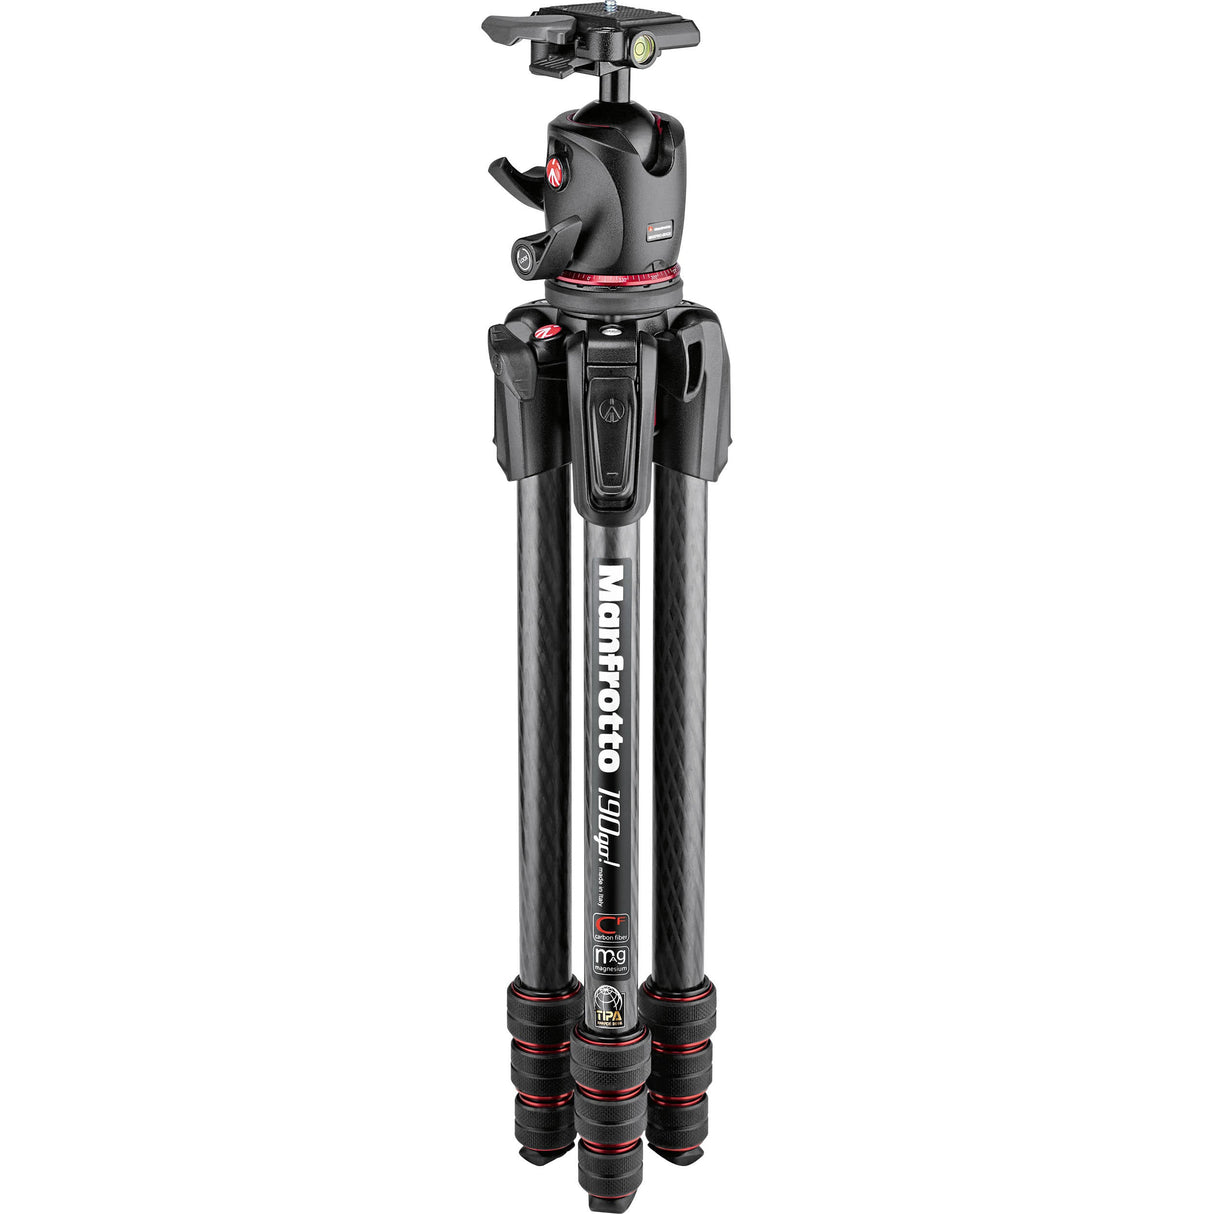 Manfrotto 190go! Carbon Fiber M-Series Tripod with MHXPRO-BHQ2 XPRO Ball Head RC2 Kit